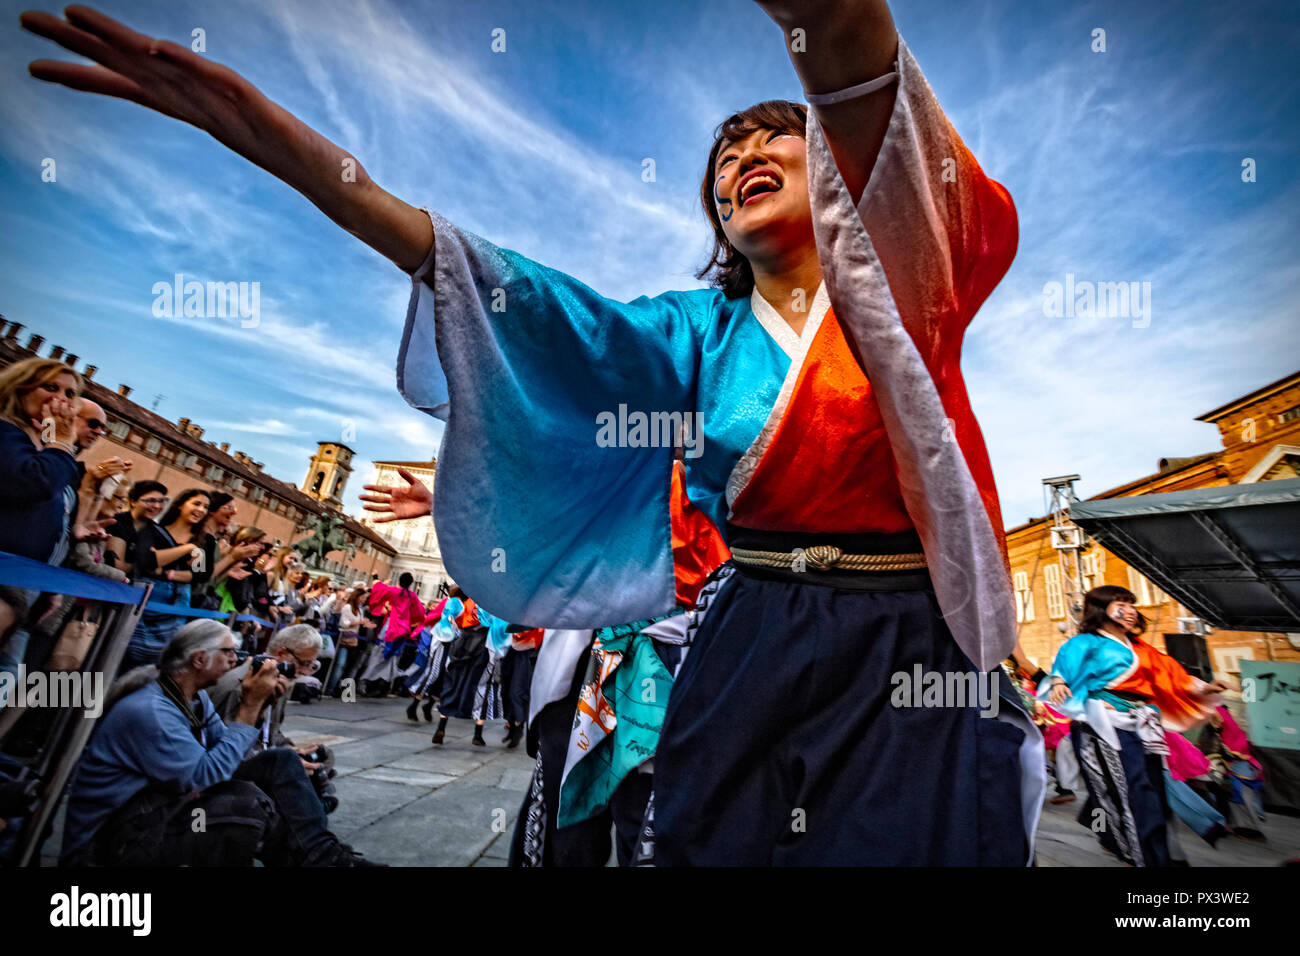 Italy Piedmont Turin Japan week - Inauguration in Piazza Castello with artistic performances of dances, drums, calligraphy and Samurai. Credit: Realy Easy Star/Alamy Live News Stock Photo